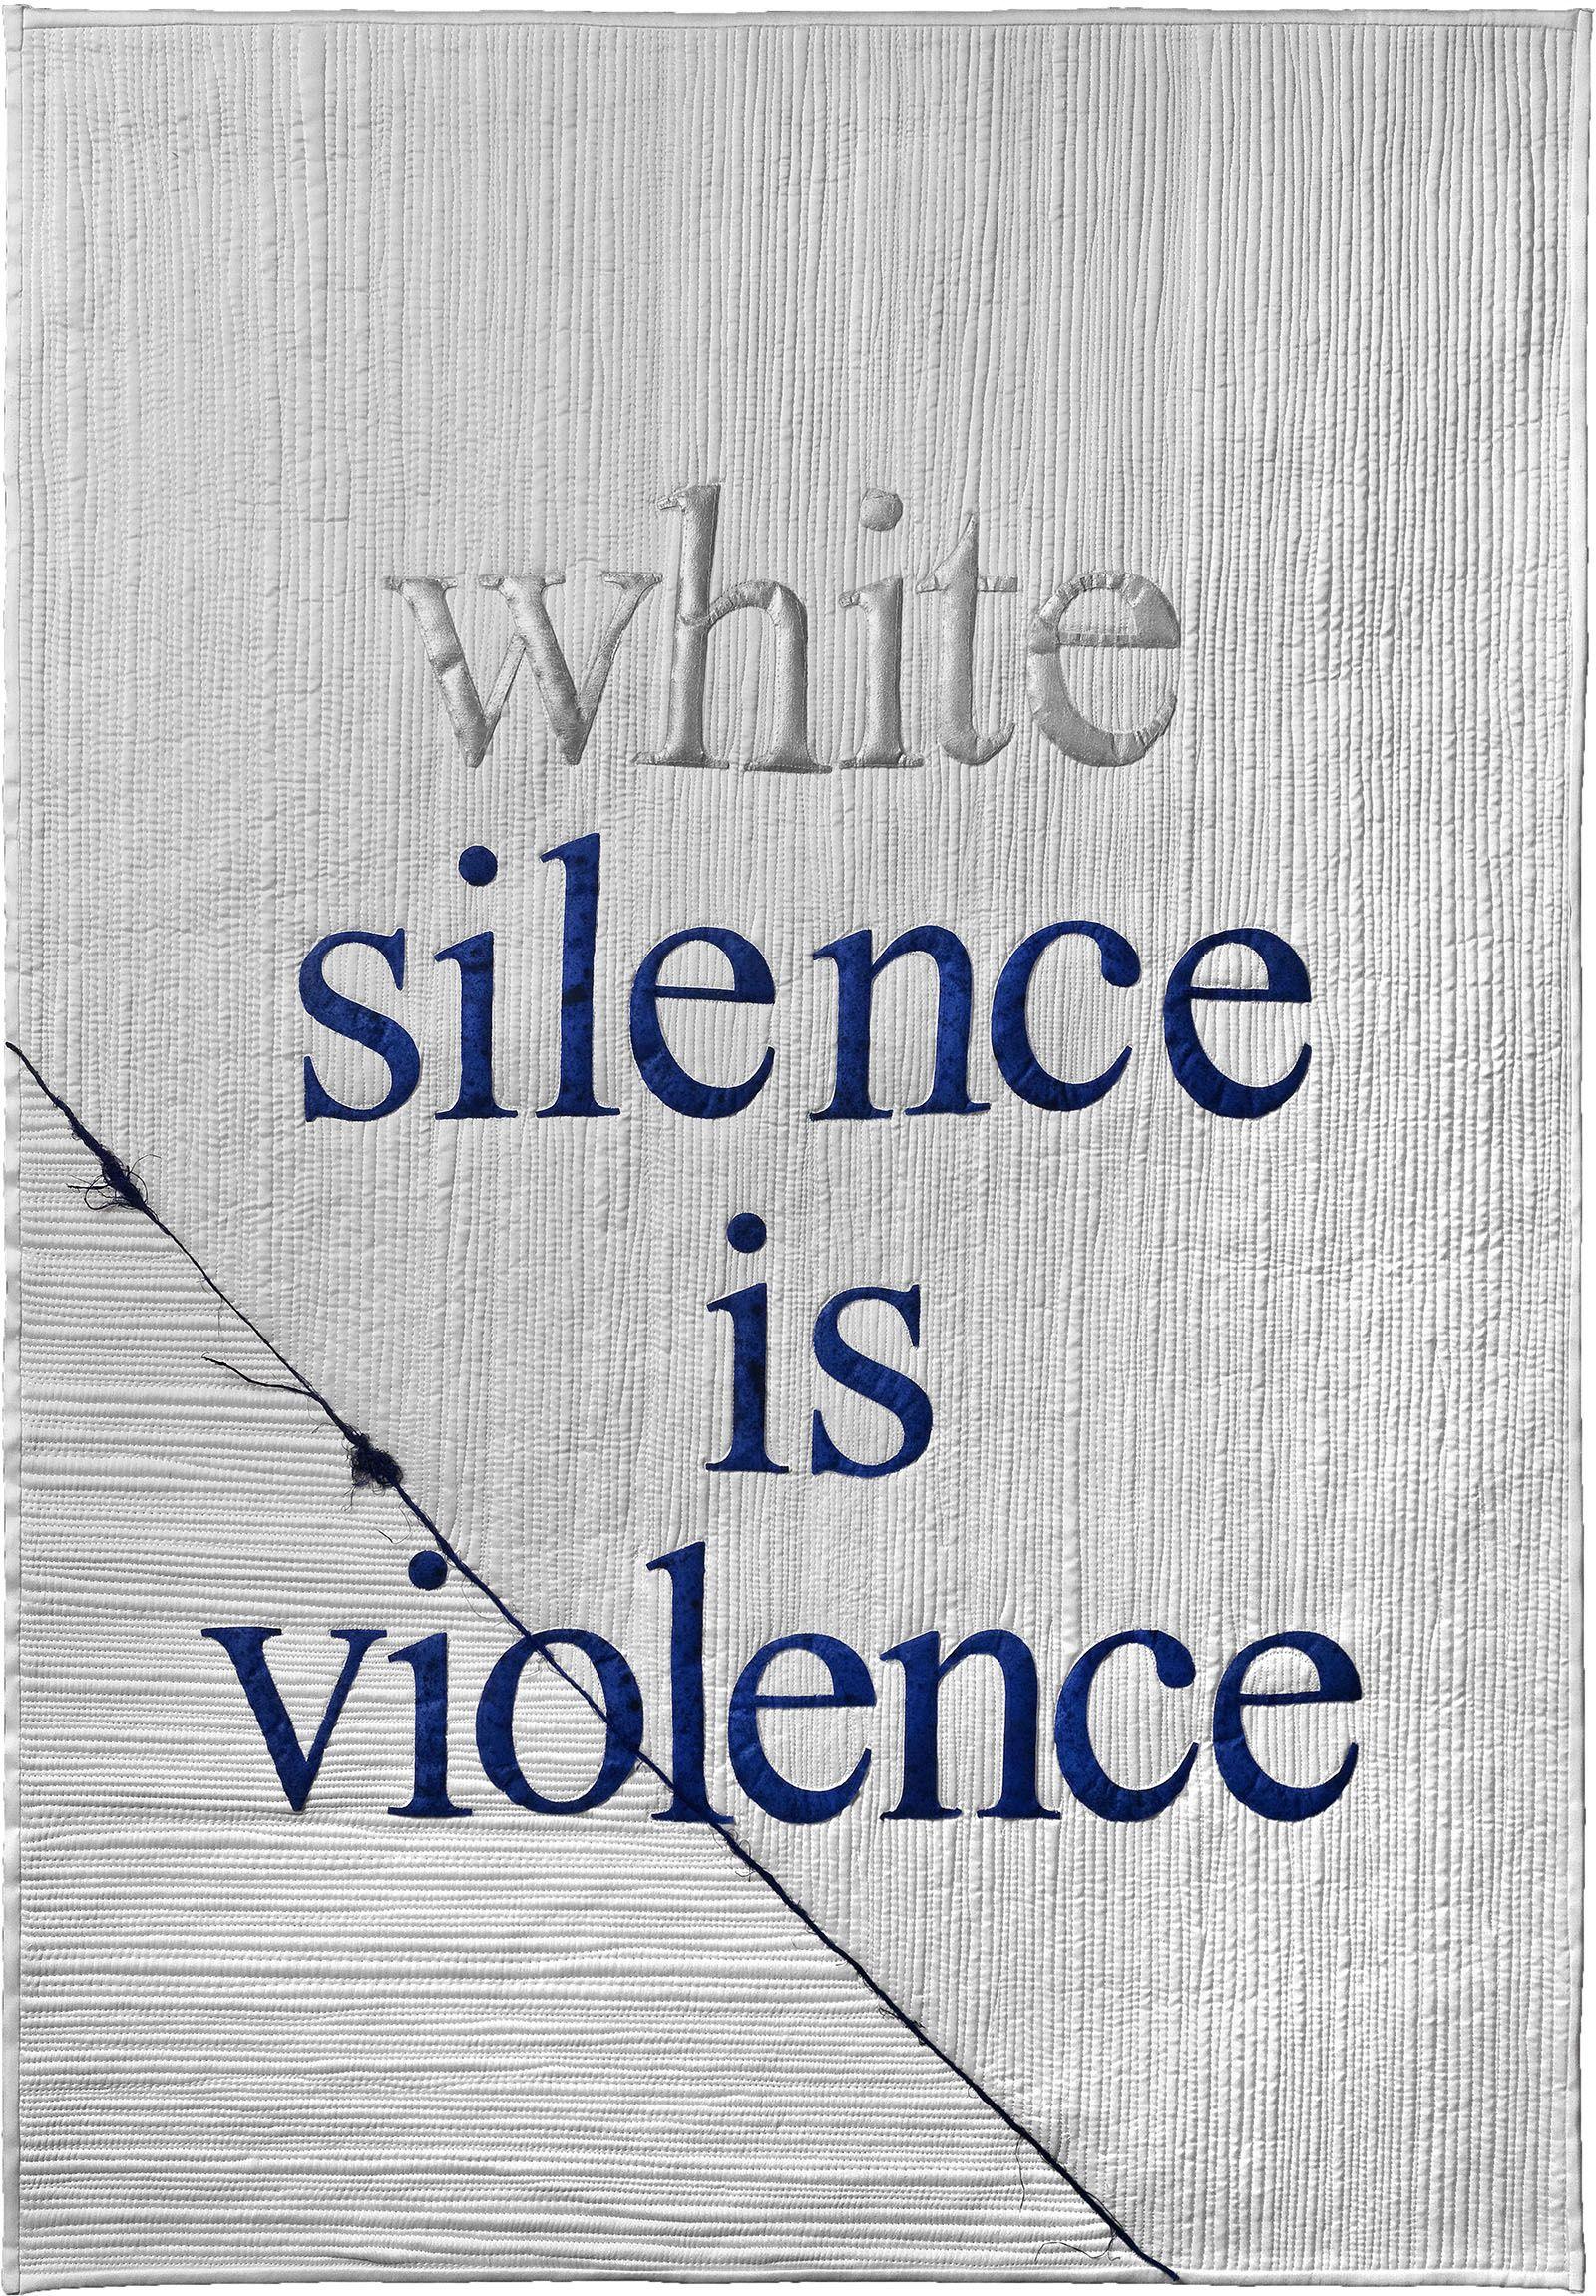 Mary  Vaneecke - (White) Silence is Violence